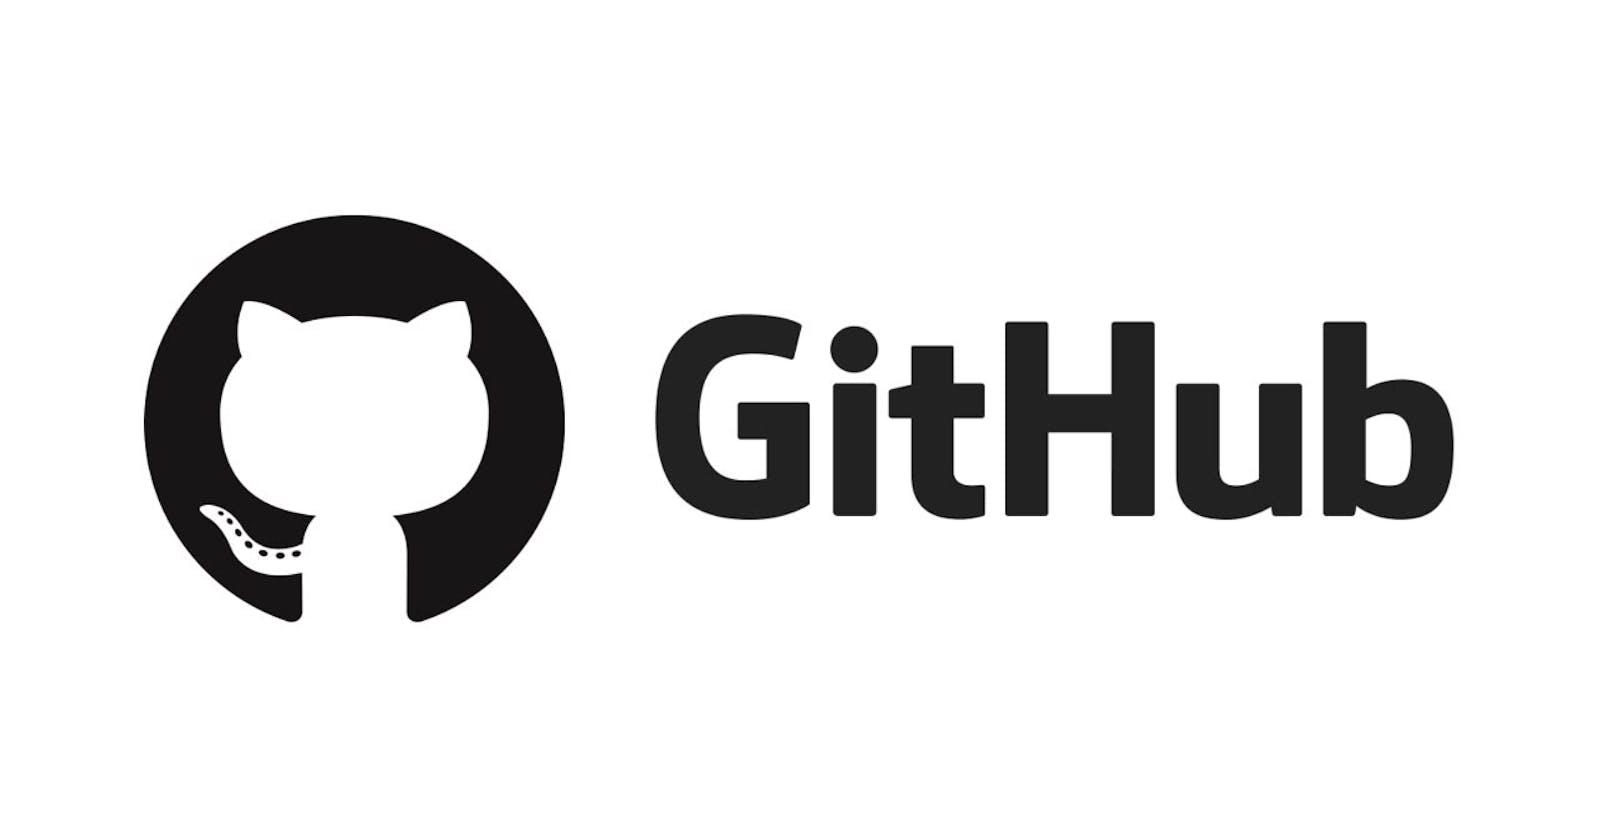 Learning Git and GitHub using Command Line.